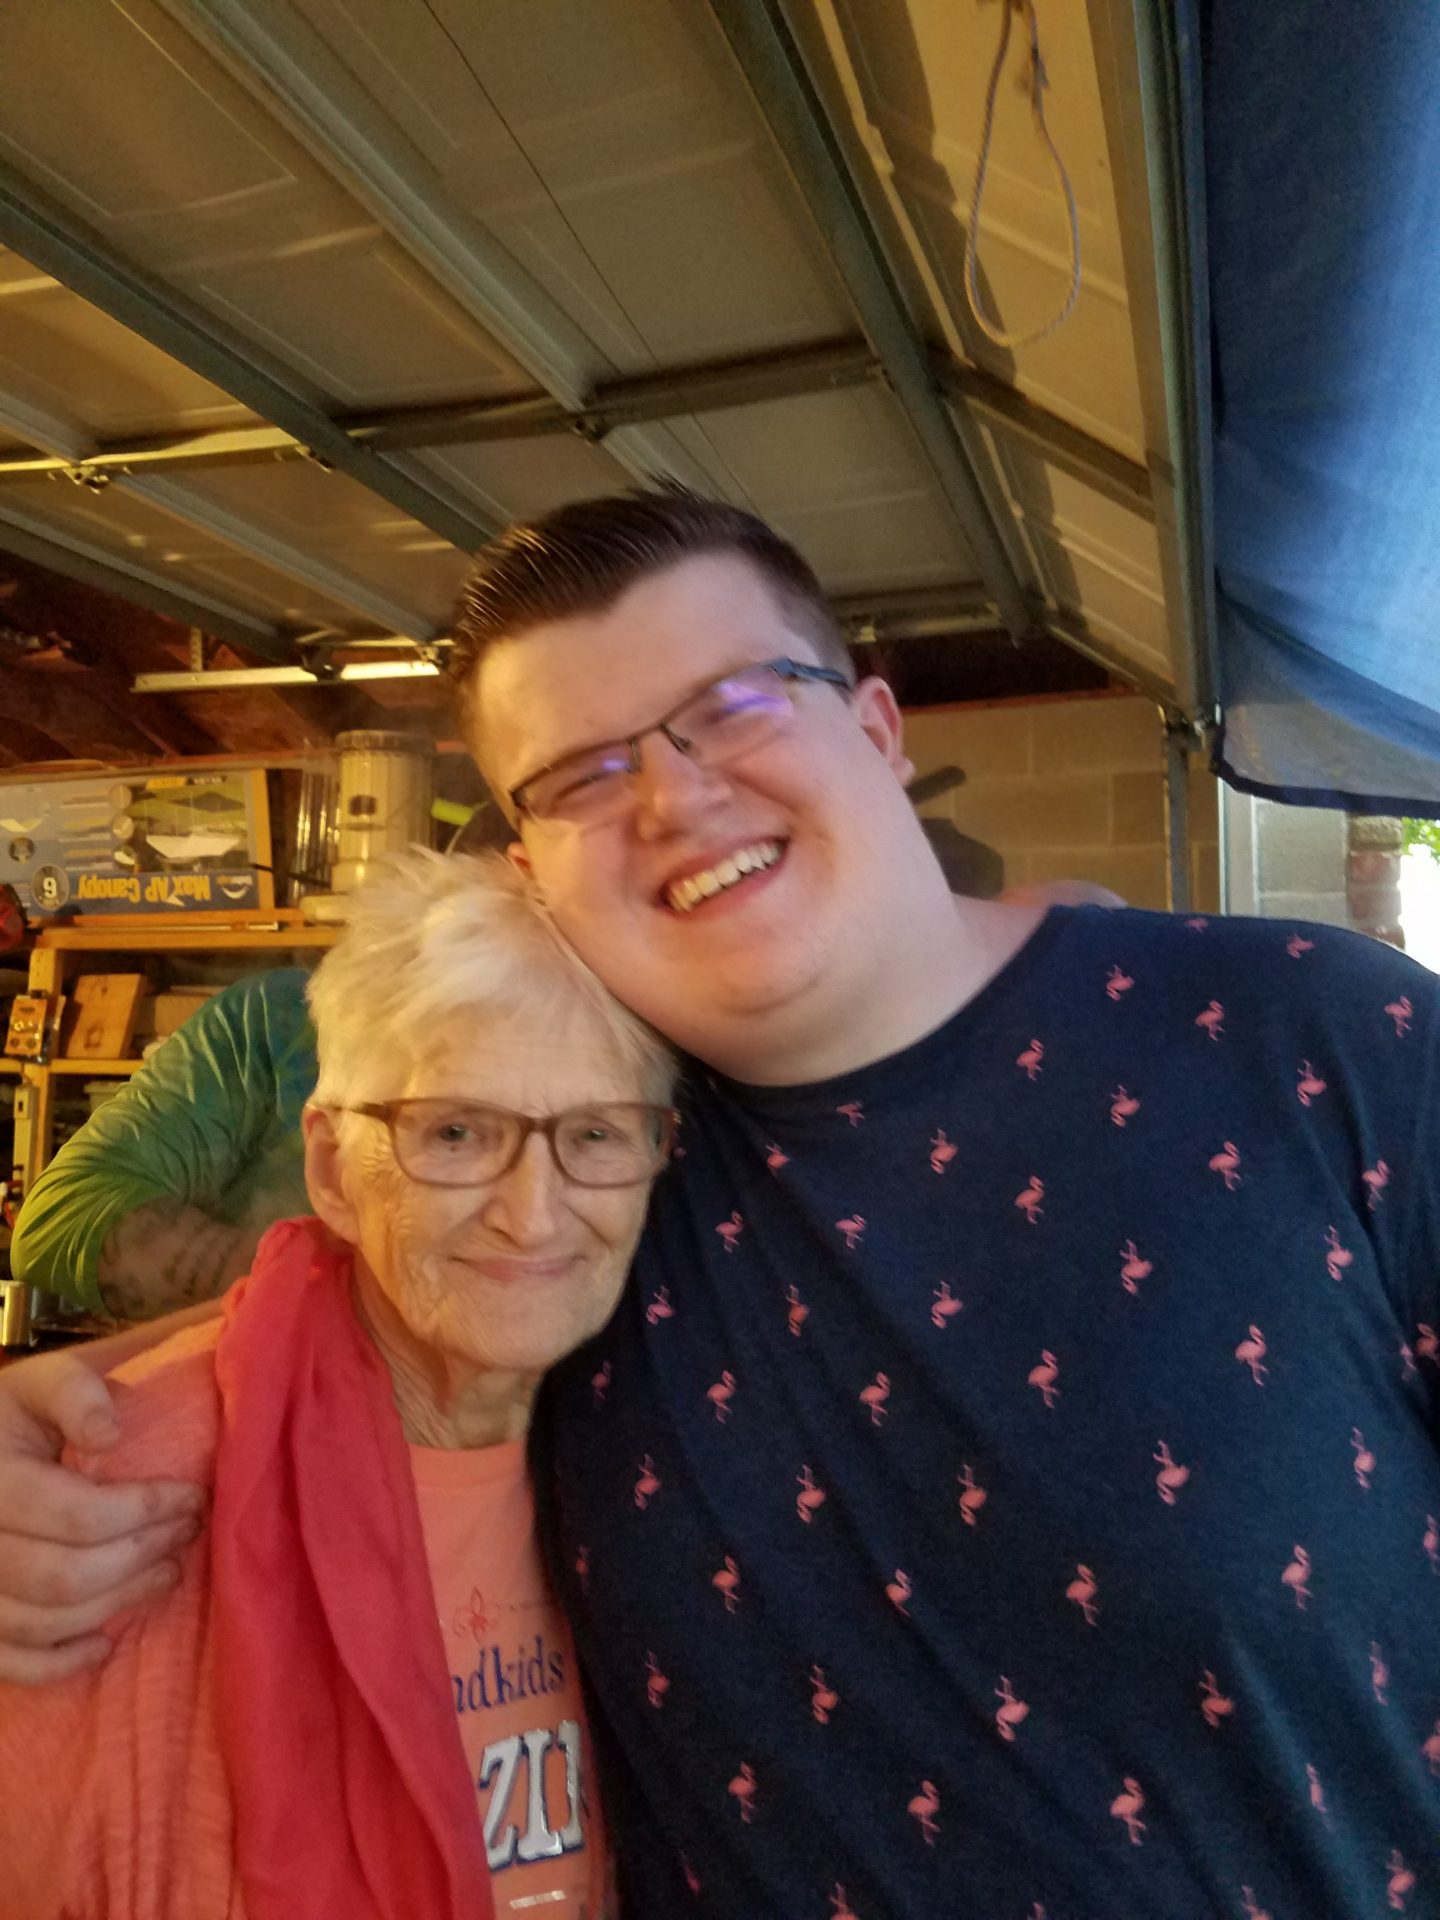 She wanted to hear him sing My Old Kentucky Home at the Derby party. This was taken afterwards....her smile says it all.  Wonderful lady who will be missed by so many.